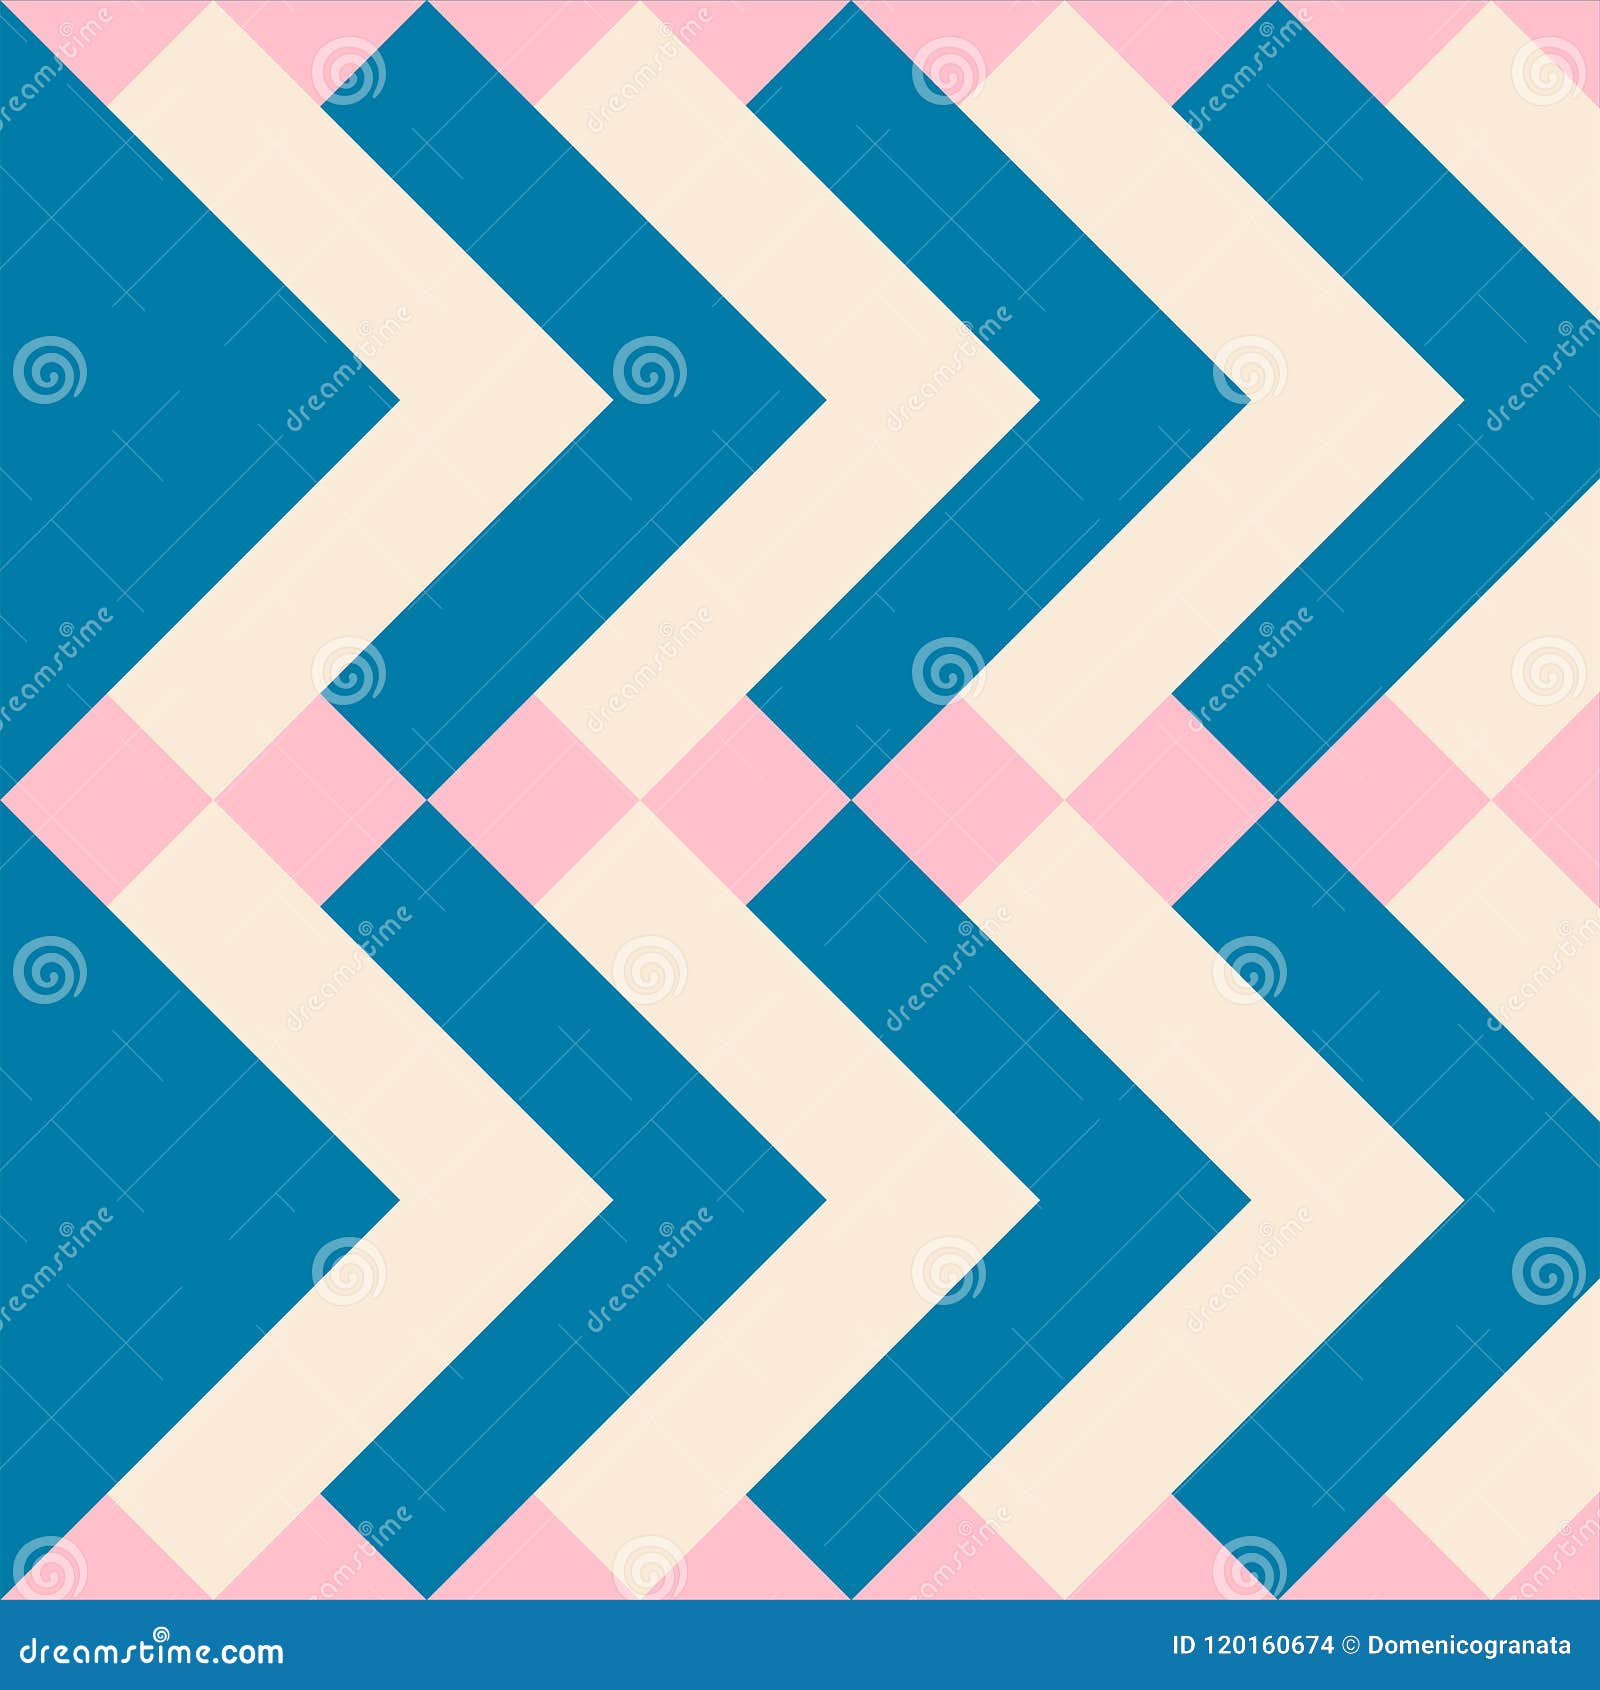 geometric pattern with blue squares